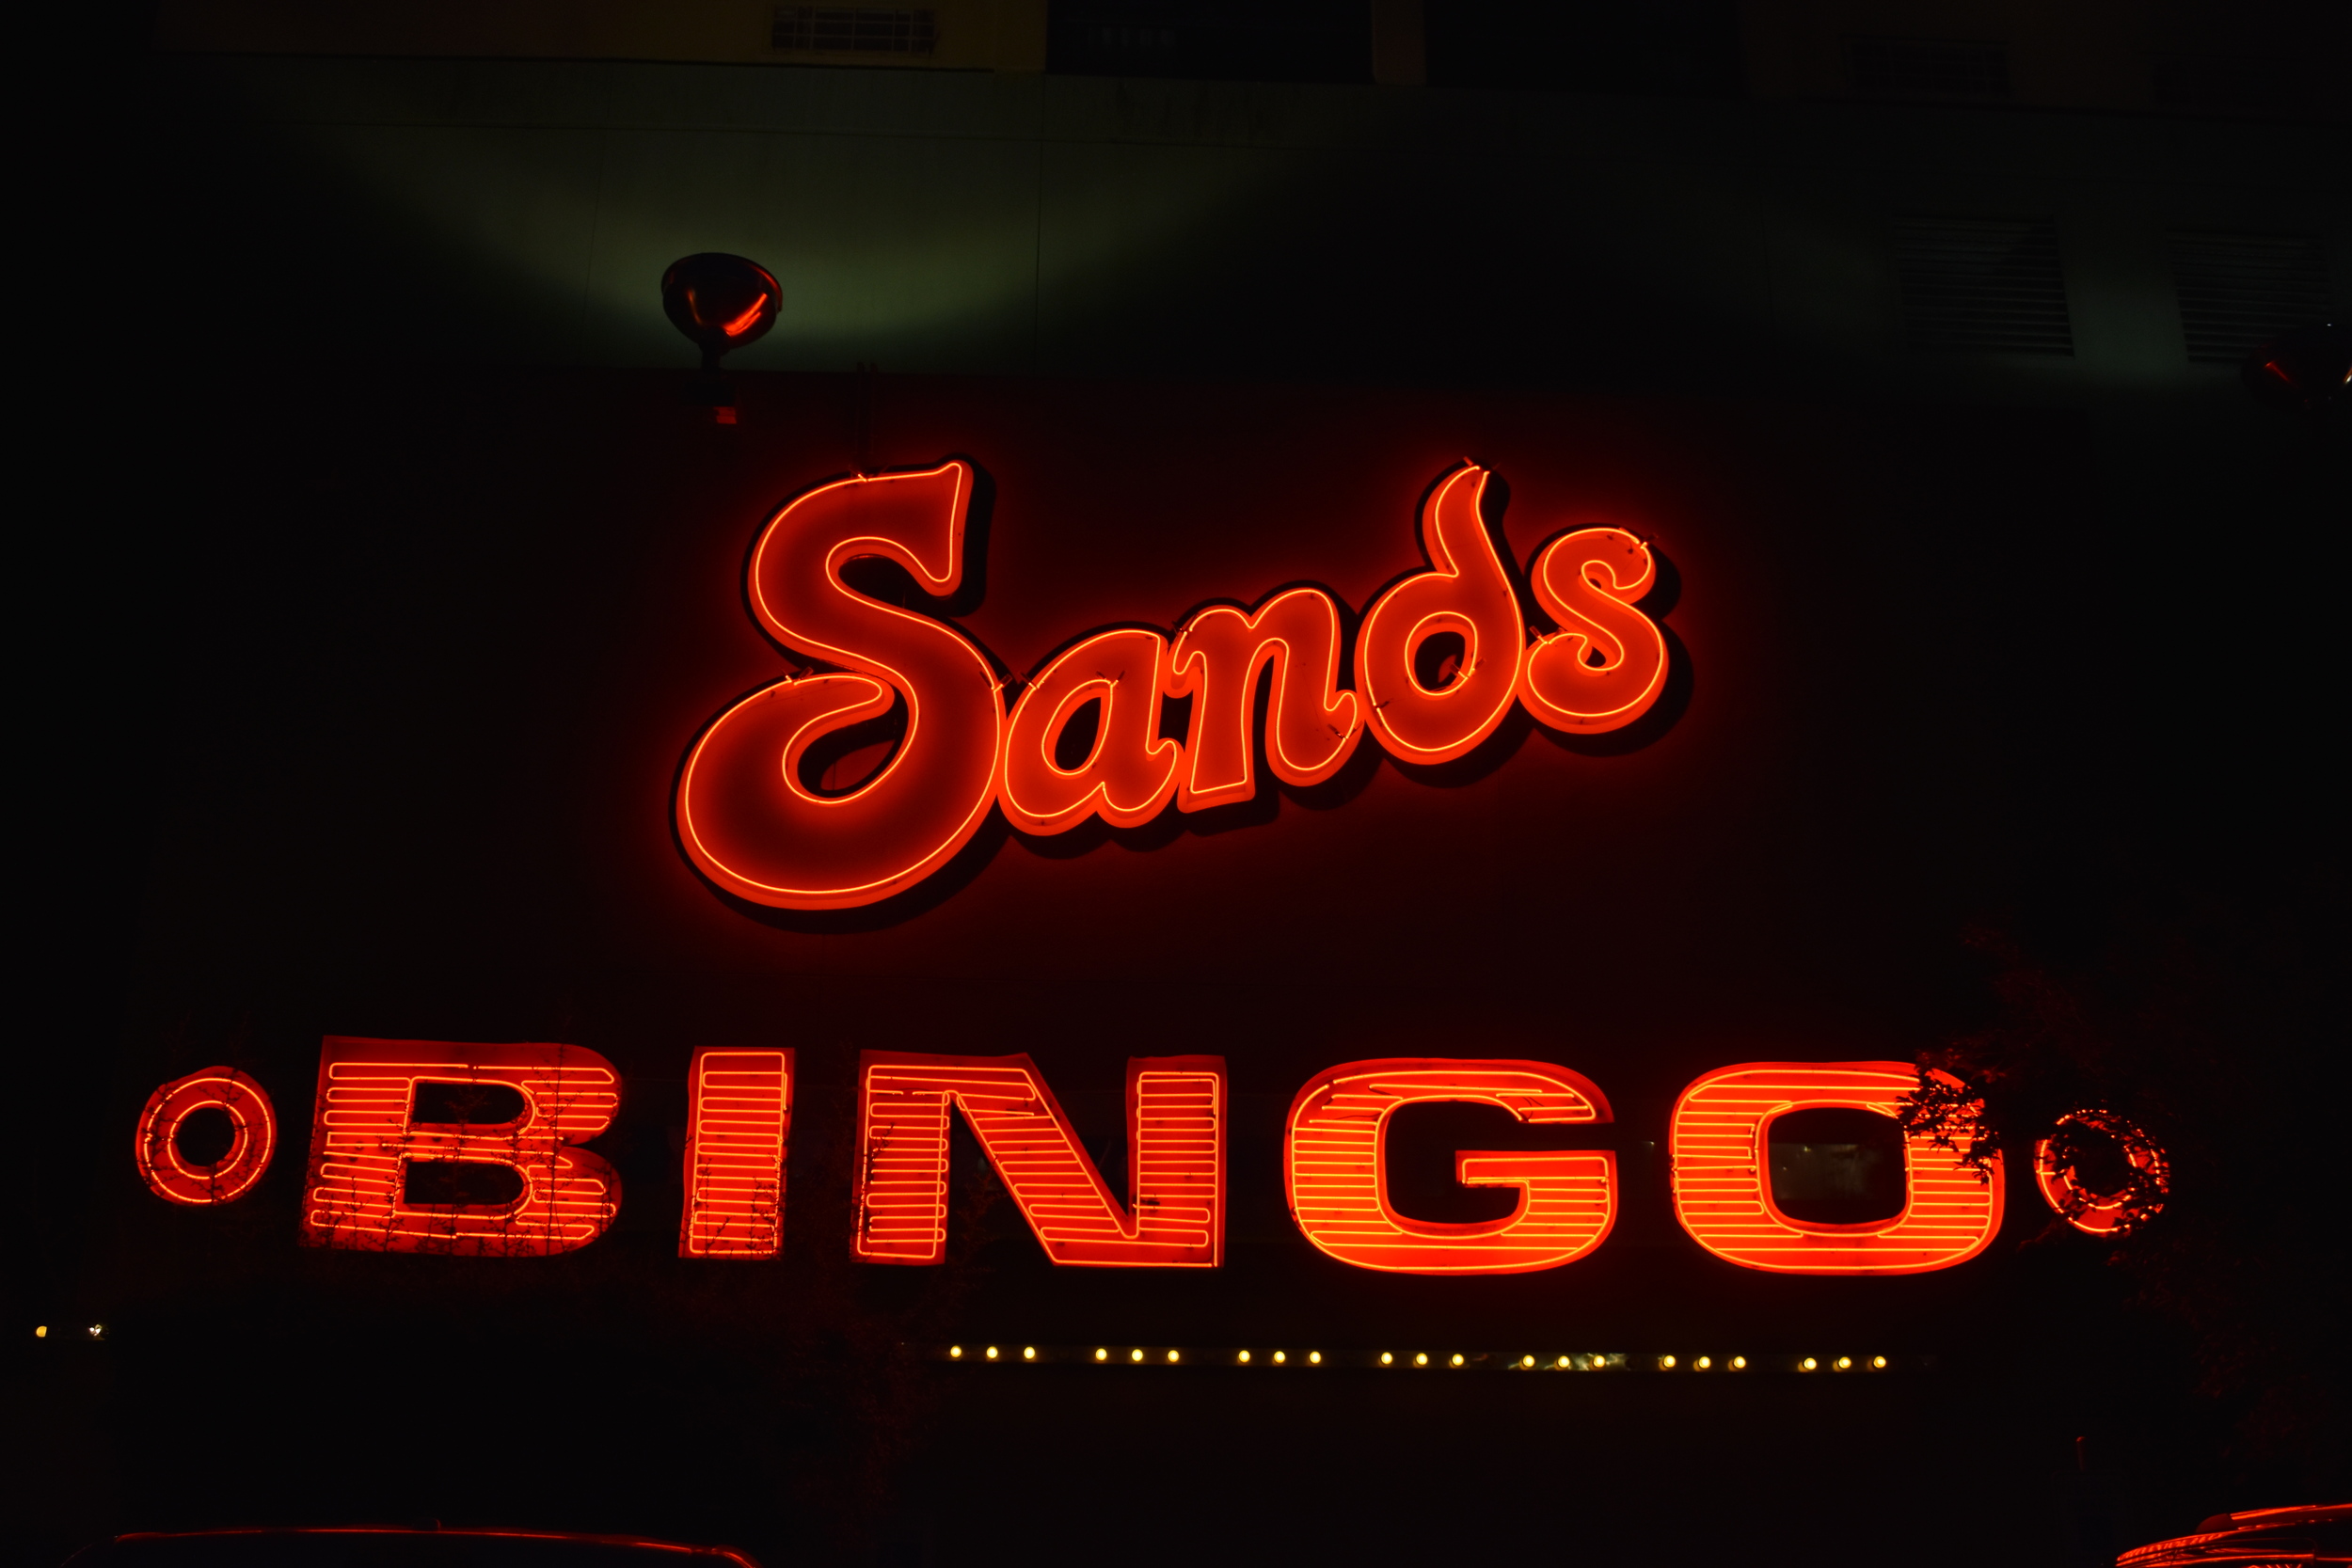 The Sands Regency wall mounted sign, Reno, Nevada